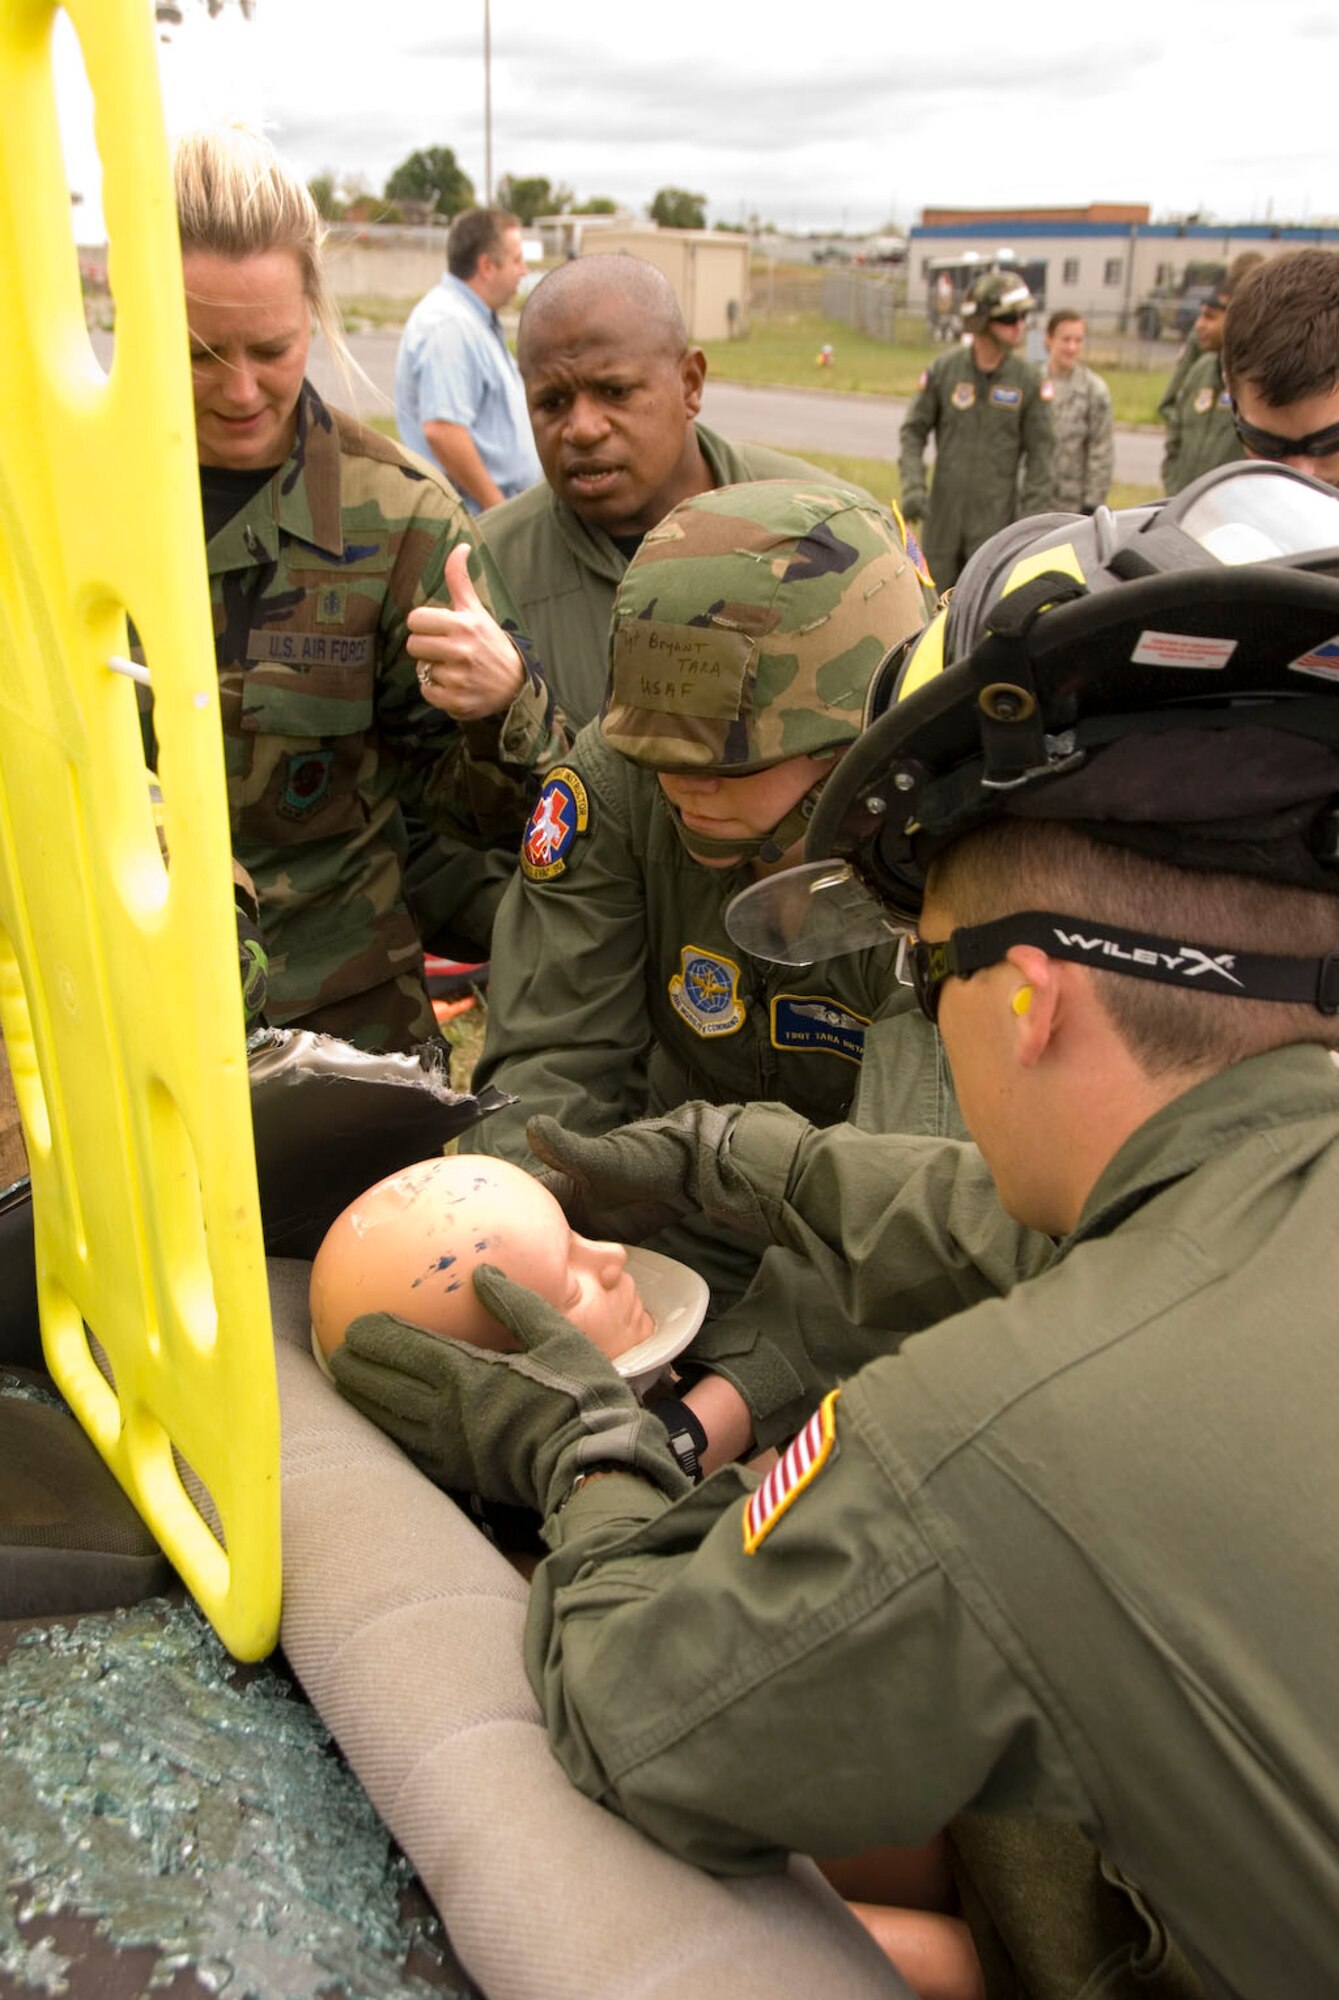 Tech. Sgt. Mary Ann Smith, Master Sgt. Peppy Smith, Tech. Sgt. Tara Bryant, and Airman First Class Jack Messner, all members of  the 167th Aeromedical Evacuation Squadron, prepare to move a dummy, posing as a car crash victim, to a stretcher during a training exercise at the 167th Airlift Wing, Martinsburg West Virginia, September 12, 2009. (U.S. Air Force photo  by Master Sgt Sean Brennan)